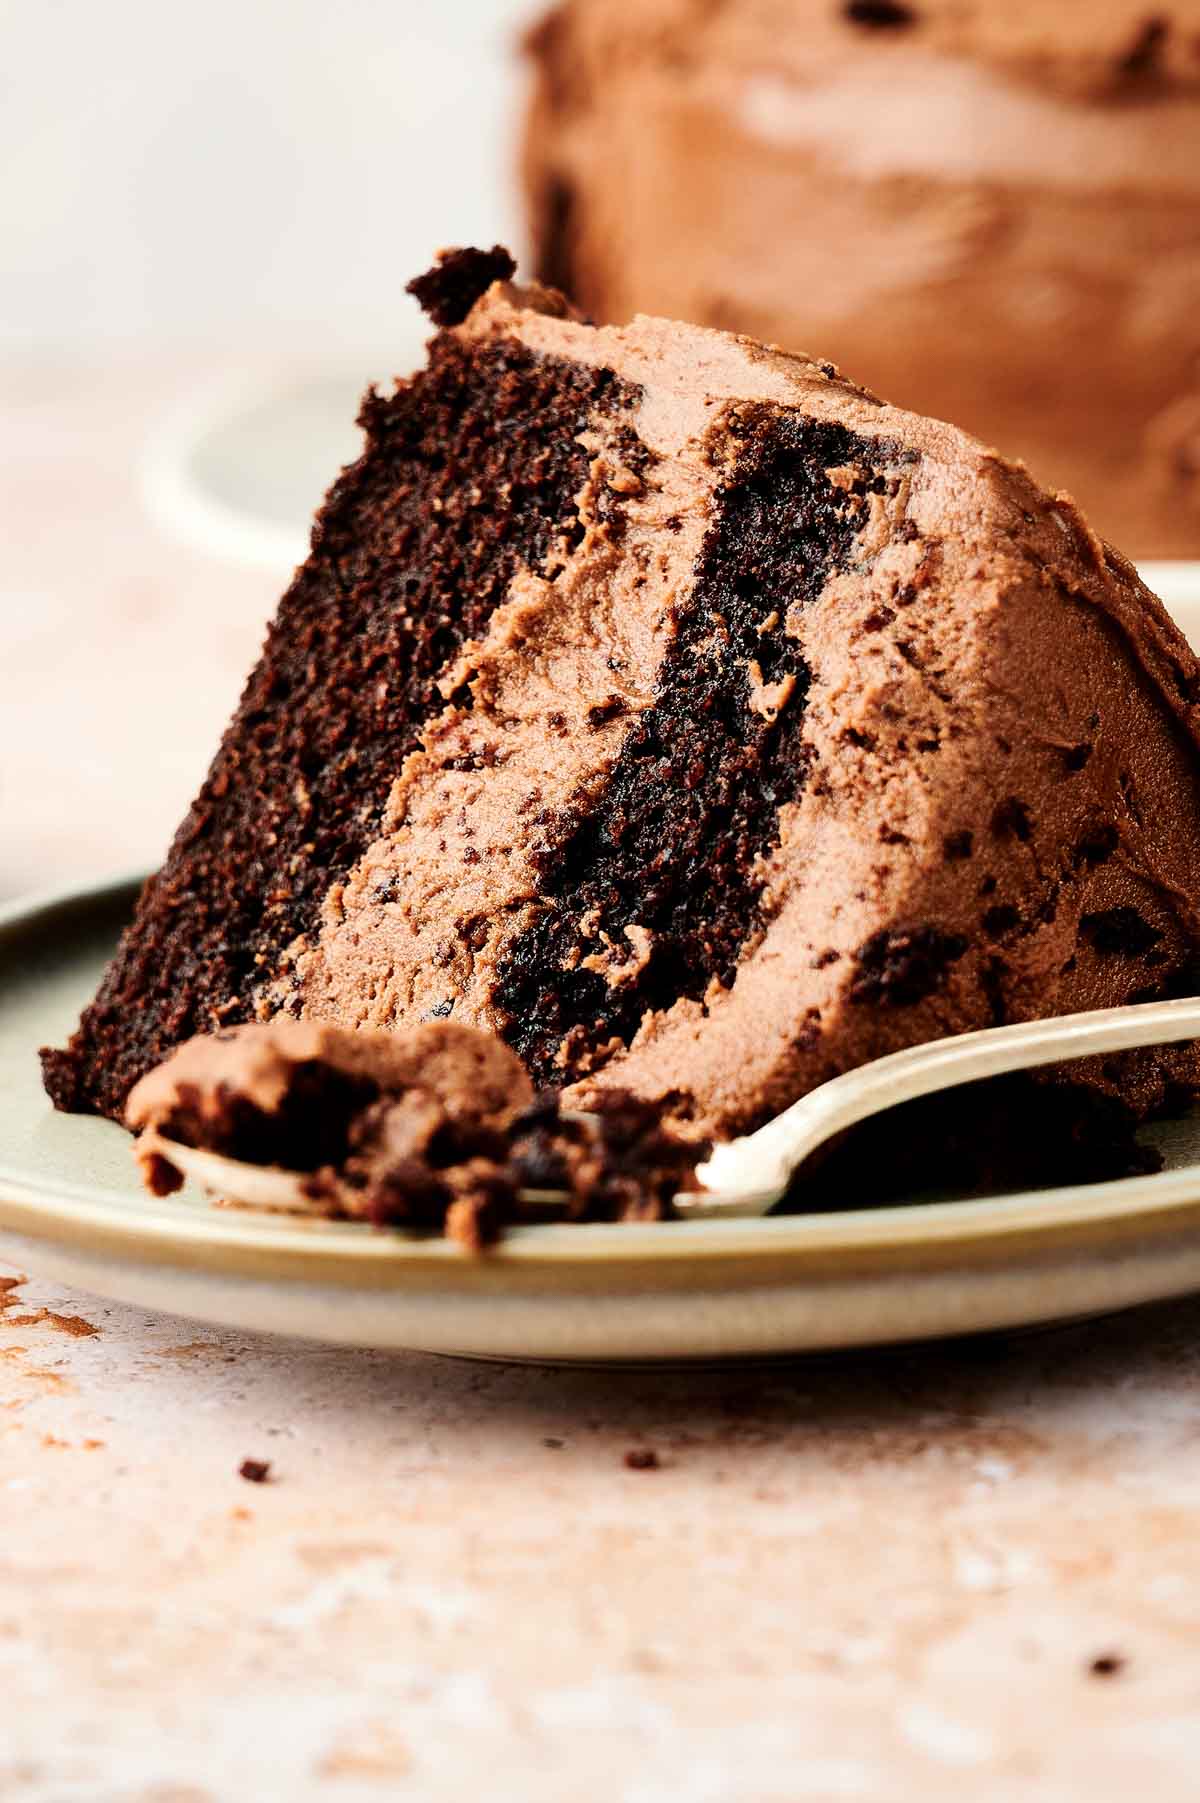 A slice of chocolate cake from a chocolate cake recipe with frosting on a plate with a fork taking a piece.